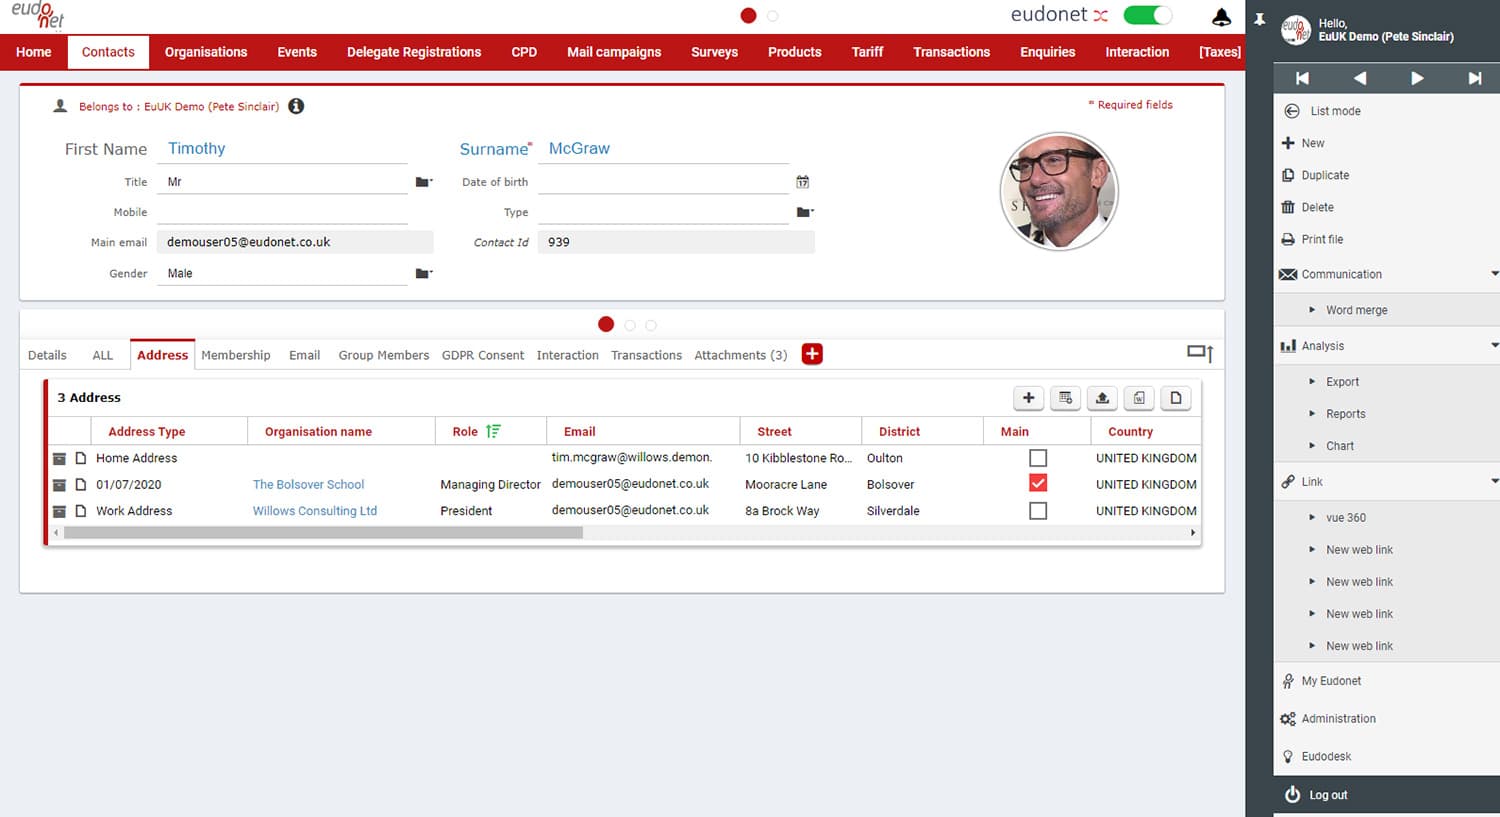 Contact Management 360 view